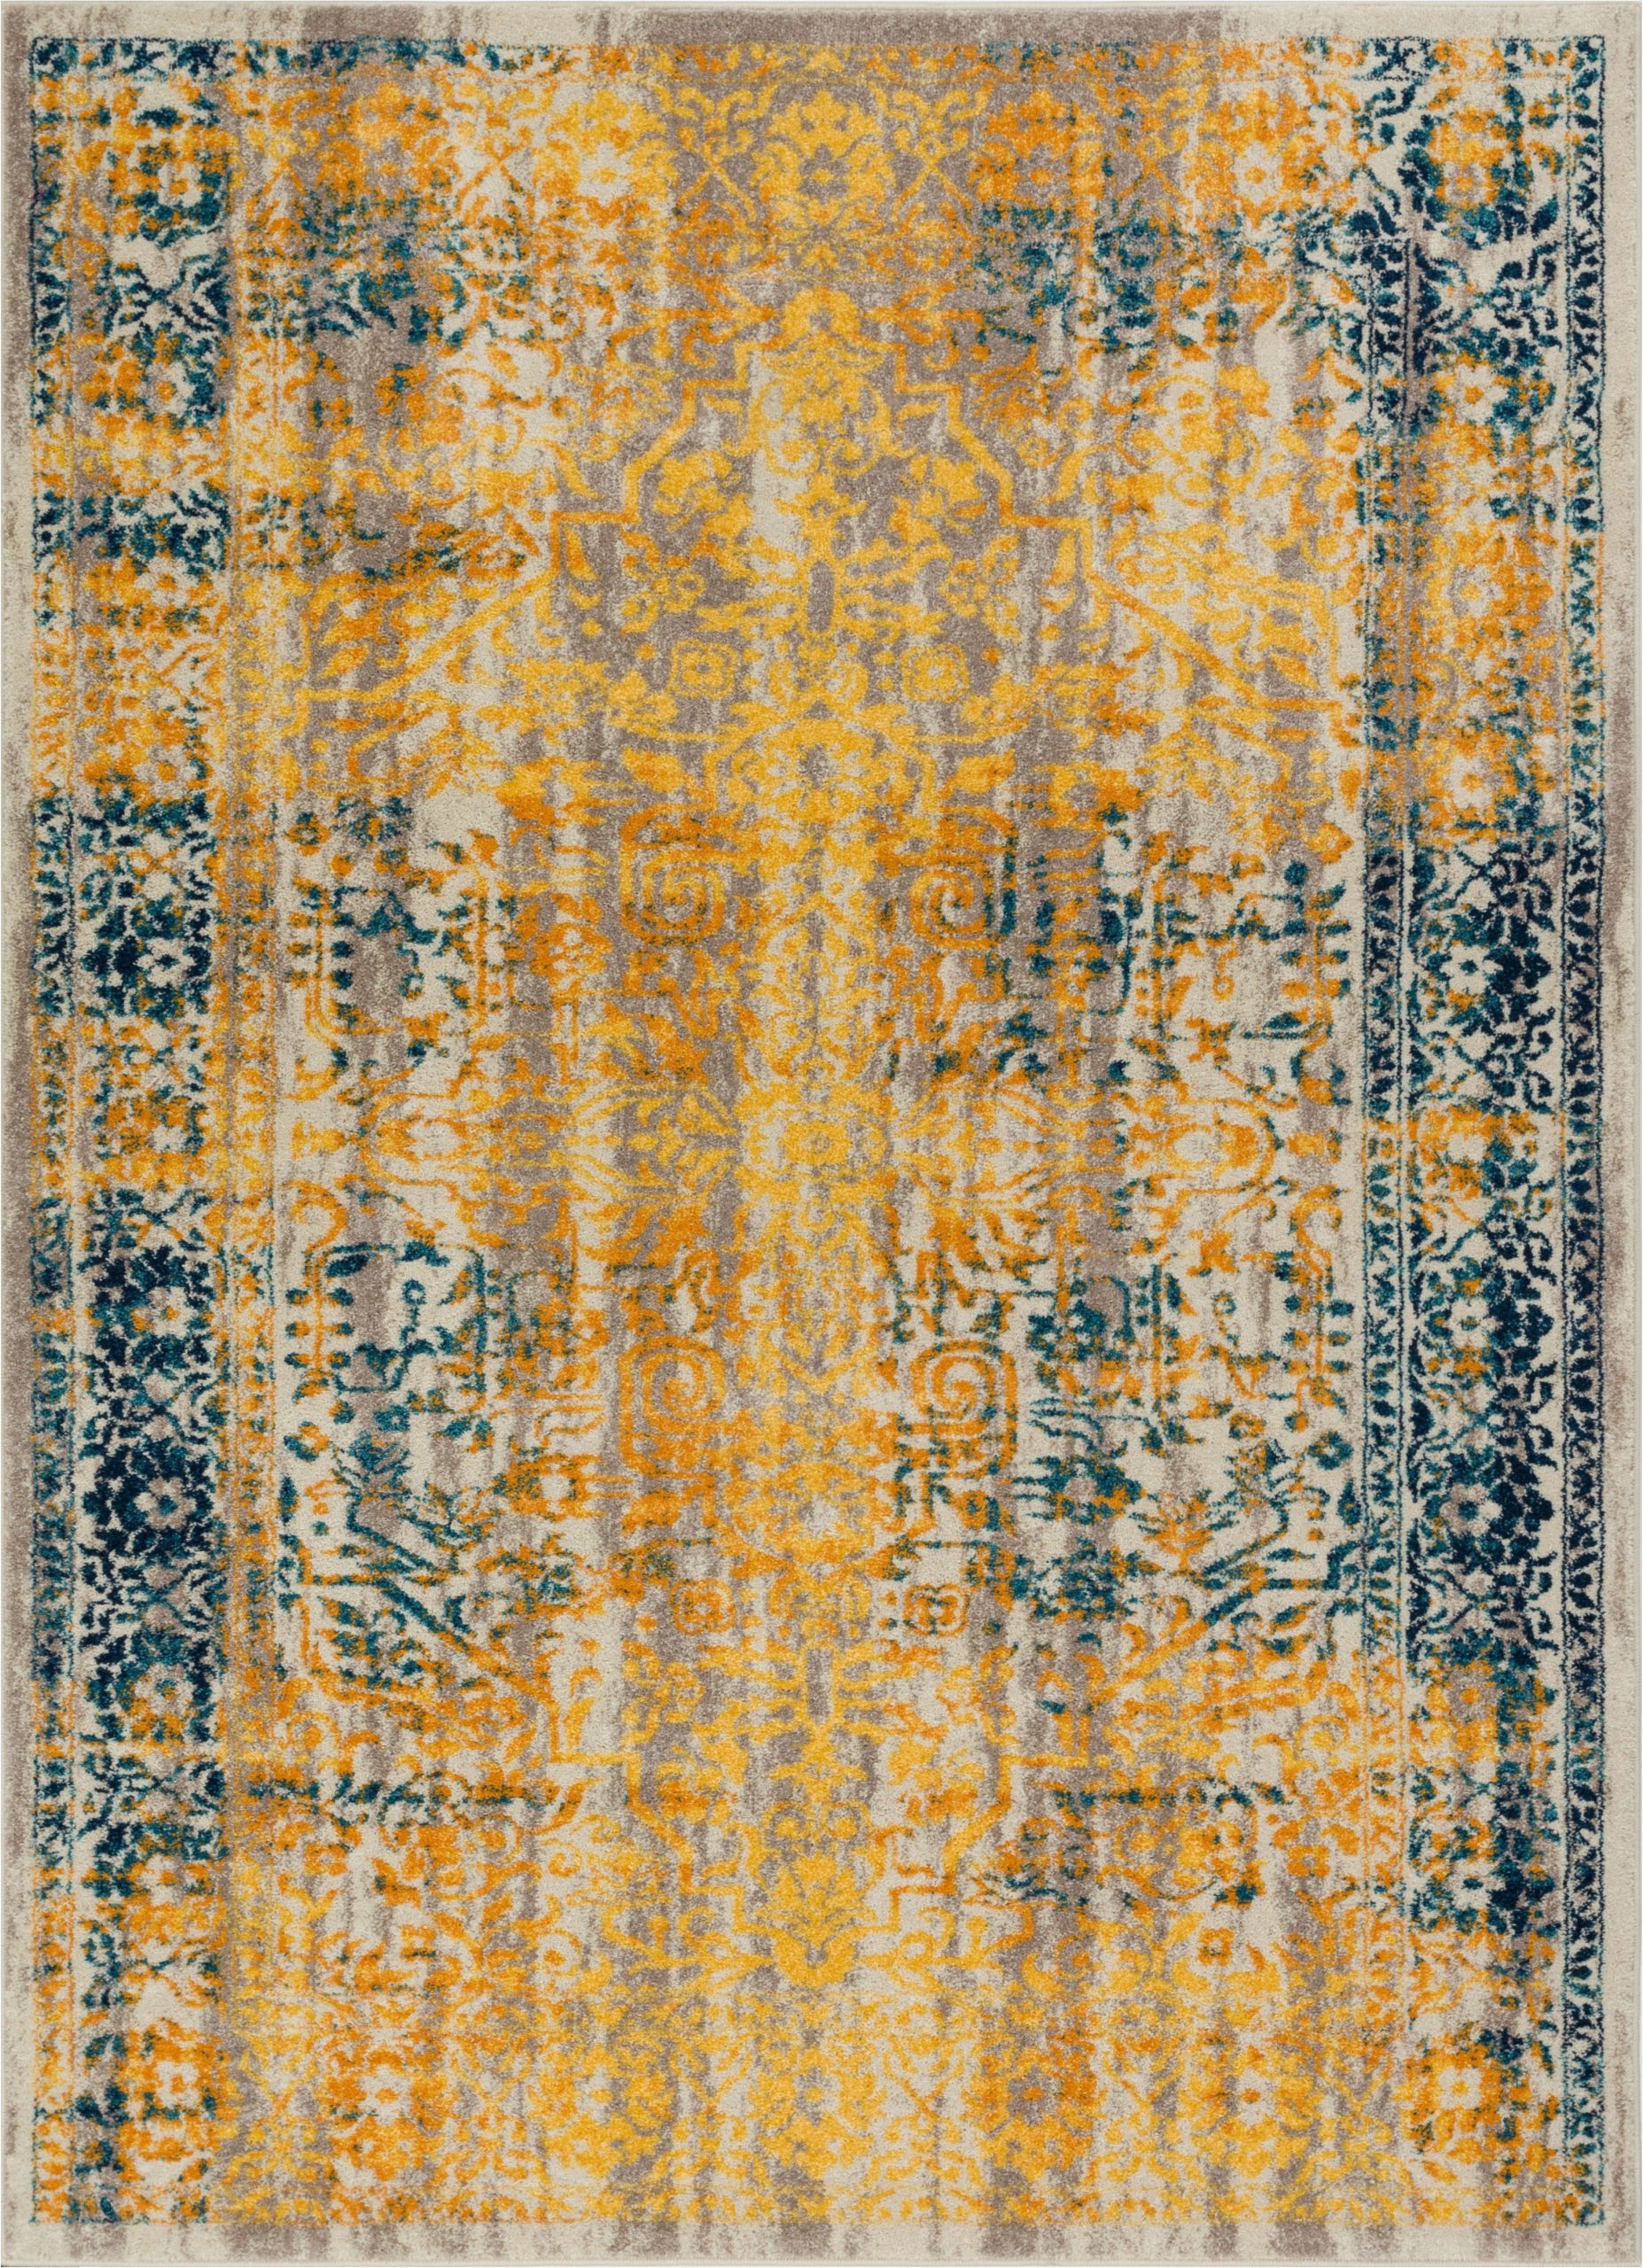 Light Blue and Gold area Rug Alhambra Modern Vintage Bright Floral Traditional Medallion Yellow Gold Blue area Rug